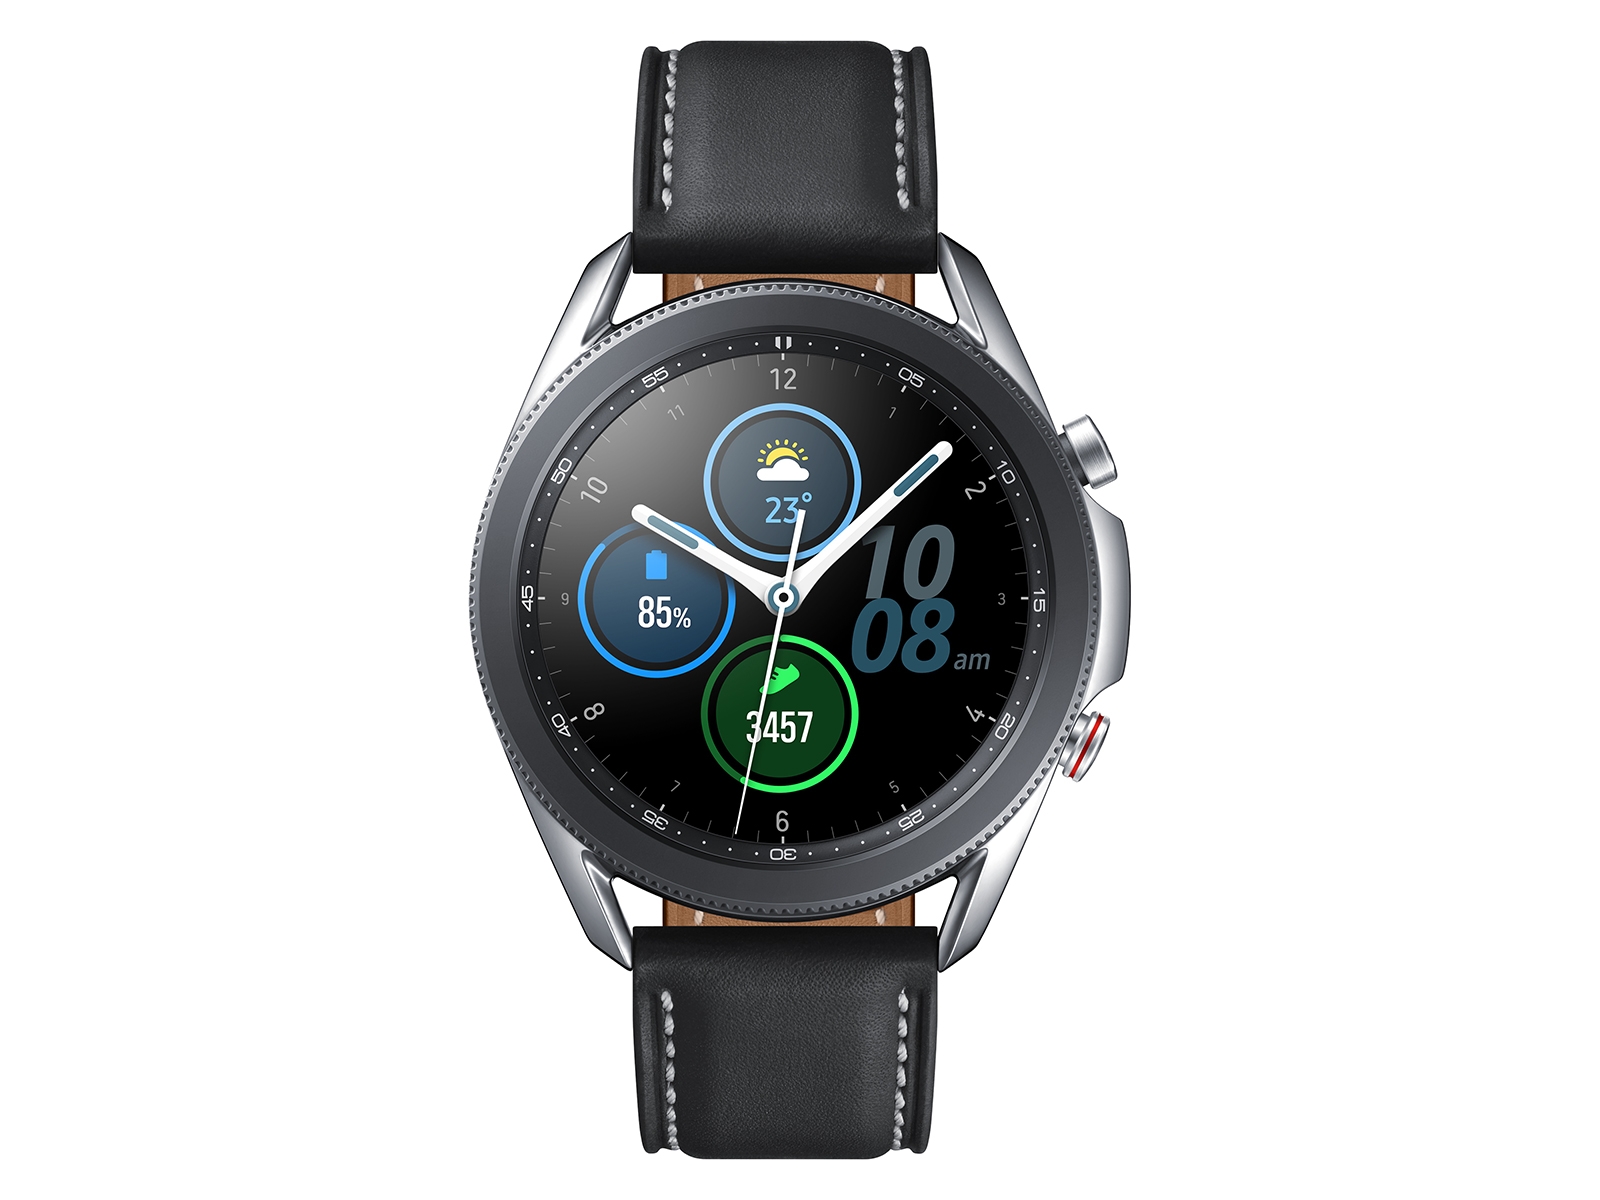 https://image-us.samsung.com/SamsungUS/home/mobile/wearables/smartwatches/pdp/gwa-3/gallery/sm-r845uzsaxar/gallery-01-110689-lte_sm-r840_galaxy_watch_3_45mm_mystic_silver_v_front-1600x1200.jpg?$720_576_PNG$